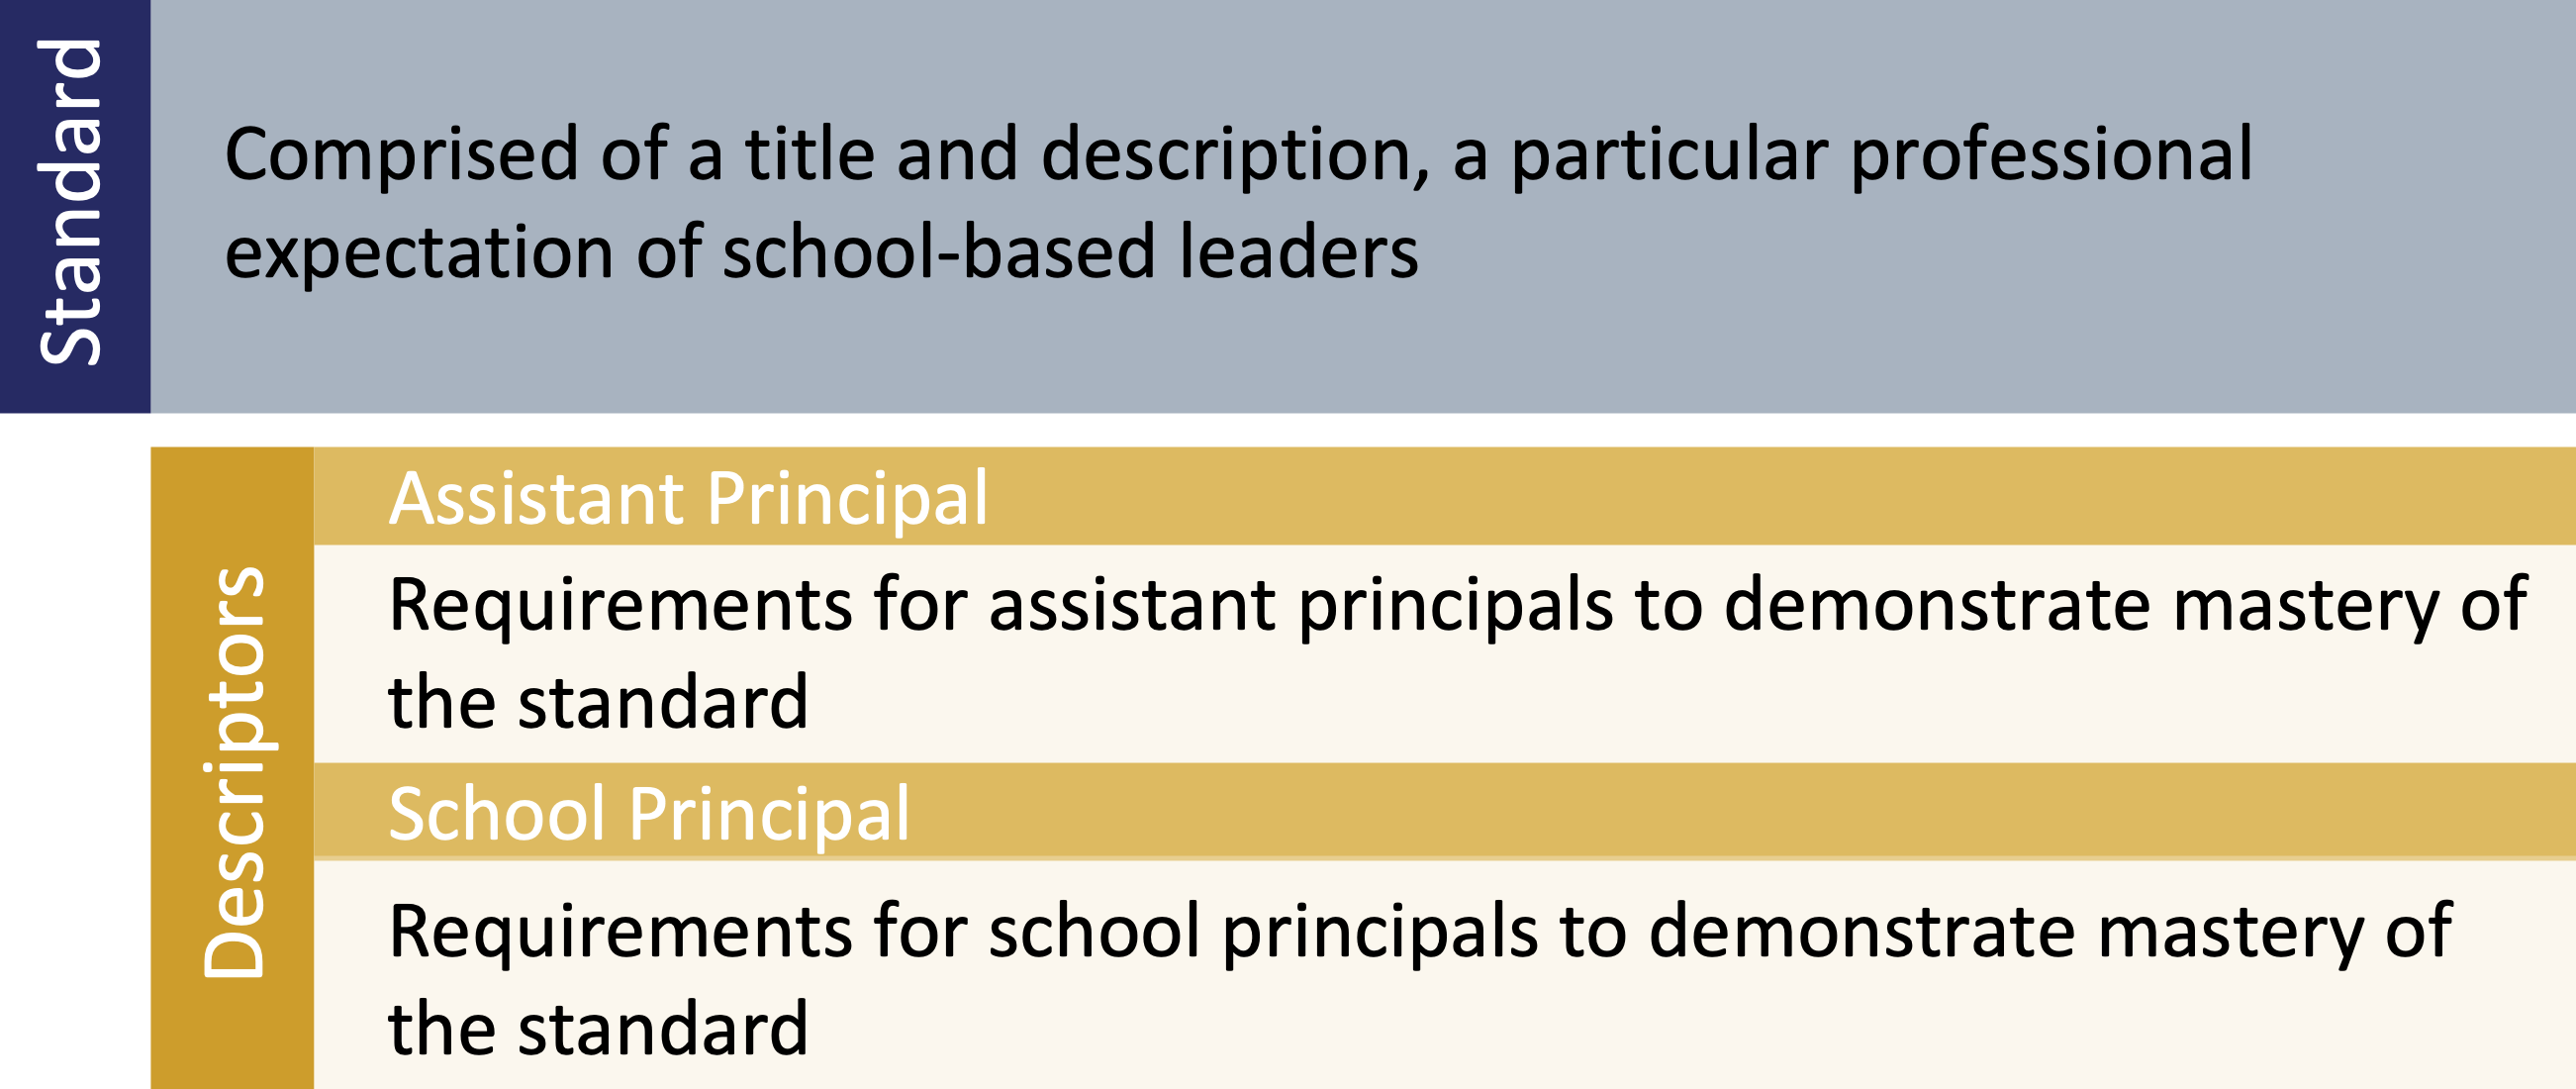 Standard: Comprised of a title and description, a particular professional expectation of school-based leaders. Descriptions: Assistant Principal: Requirements for assistant principals to demonstrate mastery of the standard. School Principal: Requirements for school principals to demonstrate mastery of the standard.